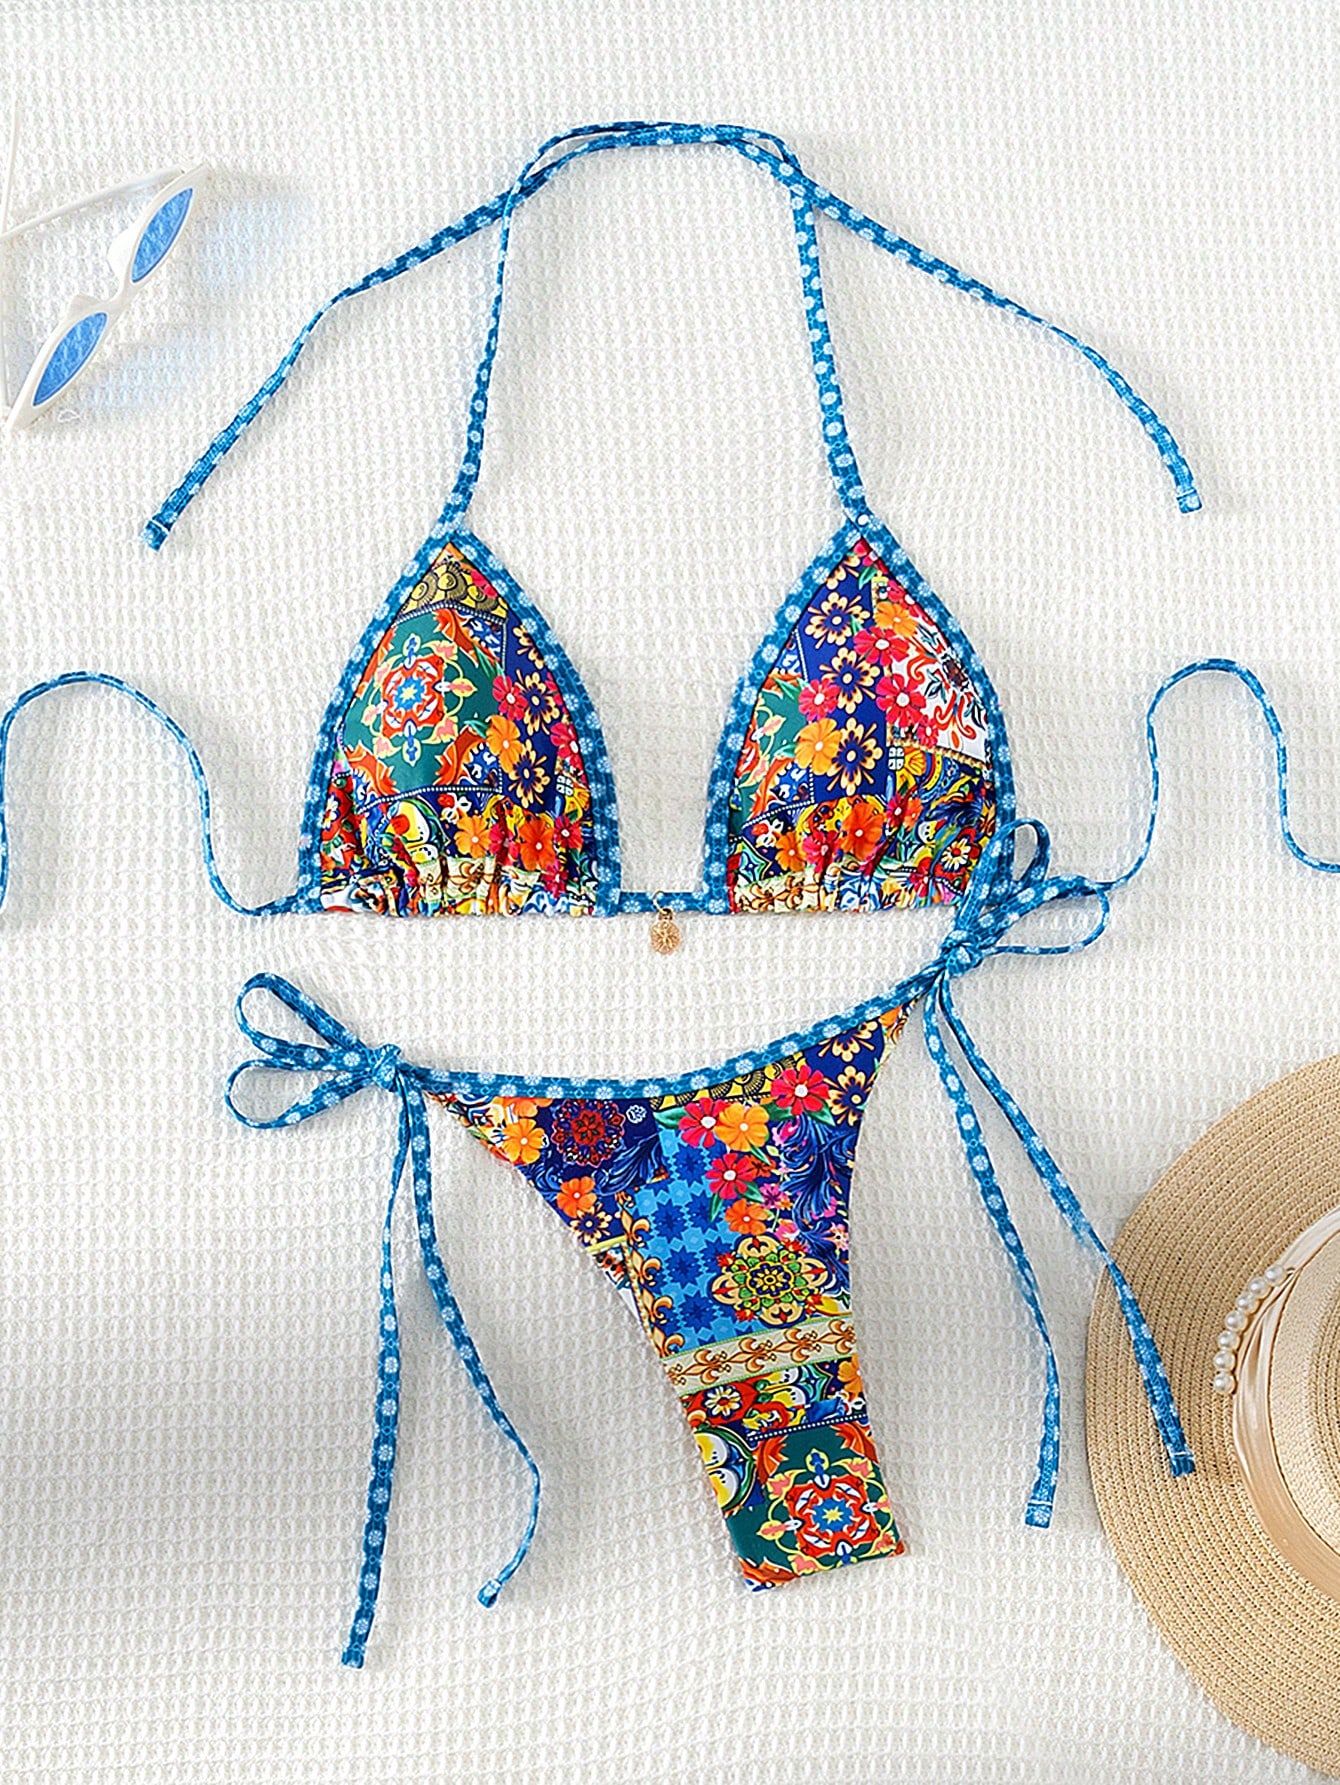 Printed Halter Neck Bikini Swimsuit Set, Two-Piece, String Beach Outfit Bathing Suit Summer | SHEIN